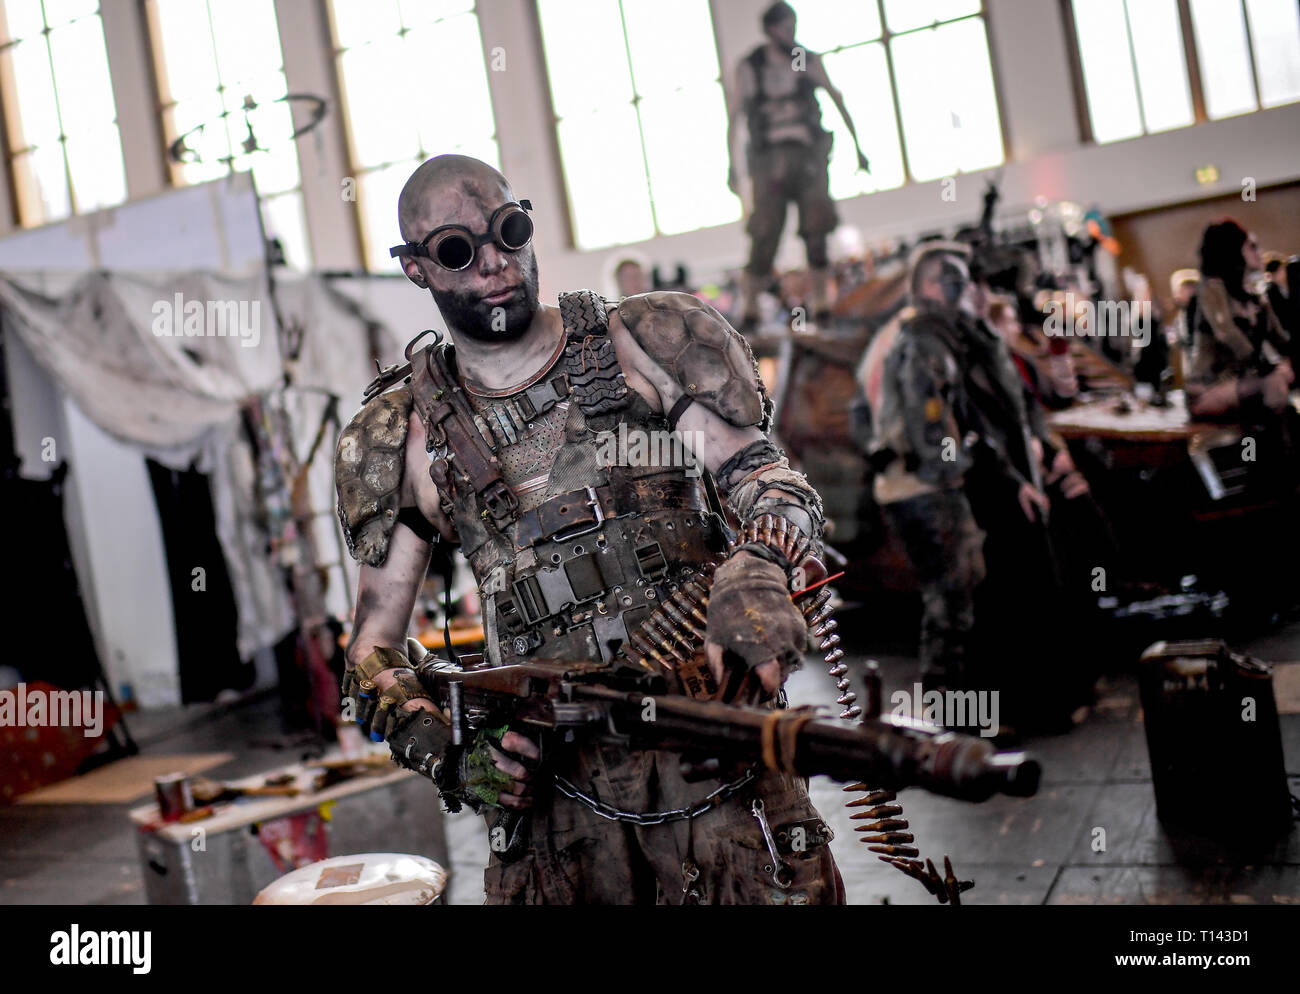 Berlin, Germany. 23rd Mar, 2019. Cosplayer of the group 'Cult of Chrome' at the 'Walker Stalker Con' in the Messe Berlin. At the meeting for fans of the series 'Game of Thrones' and 'The Walking Dead' fans can meet their idols. Credit: Britta Pedersen/dpa-Zentralbild/dpa/Alamy Live News Stock Photo